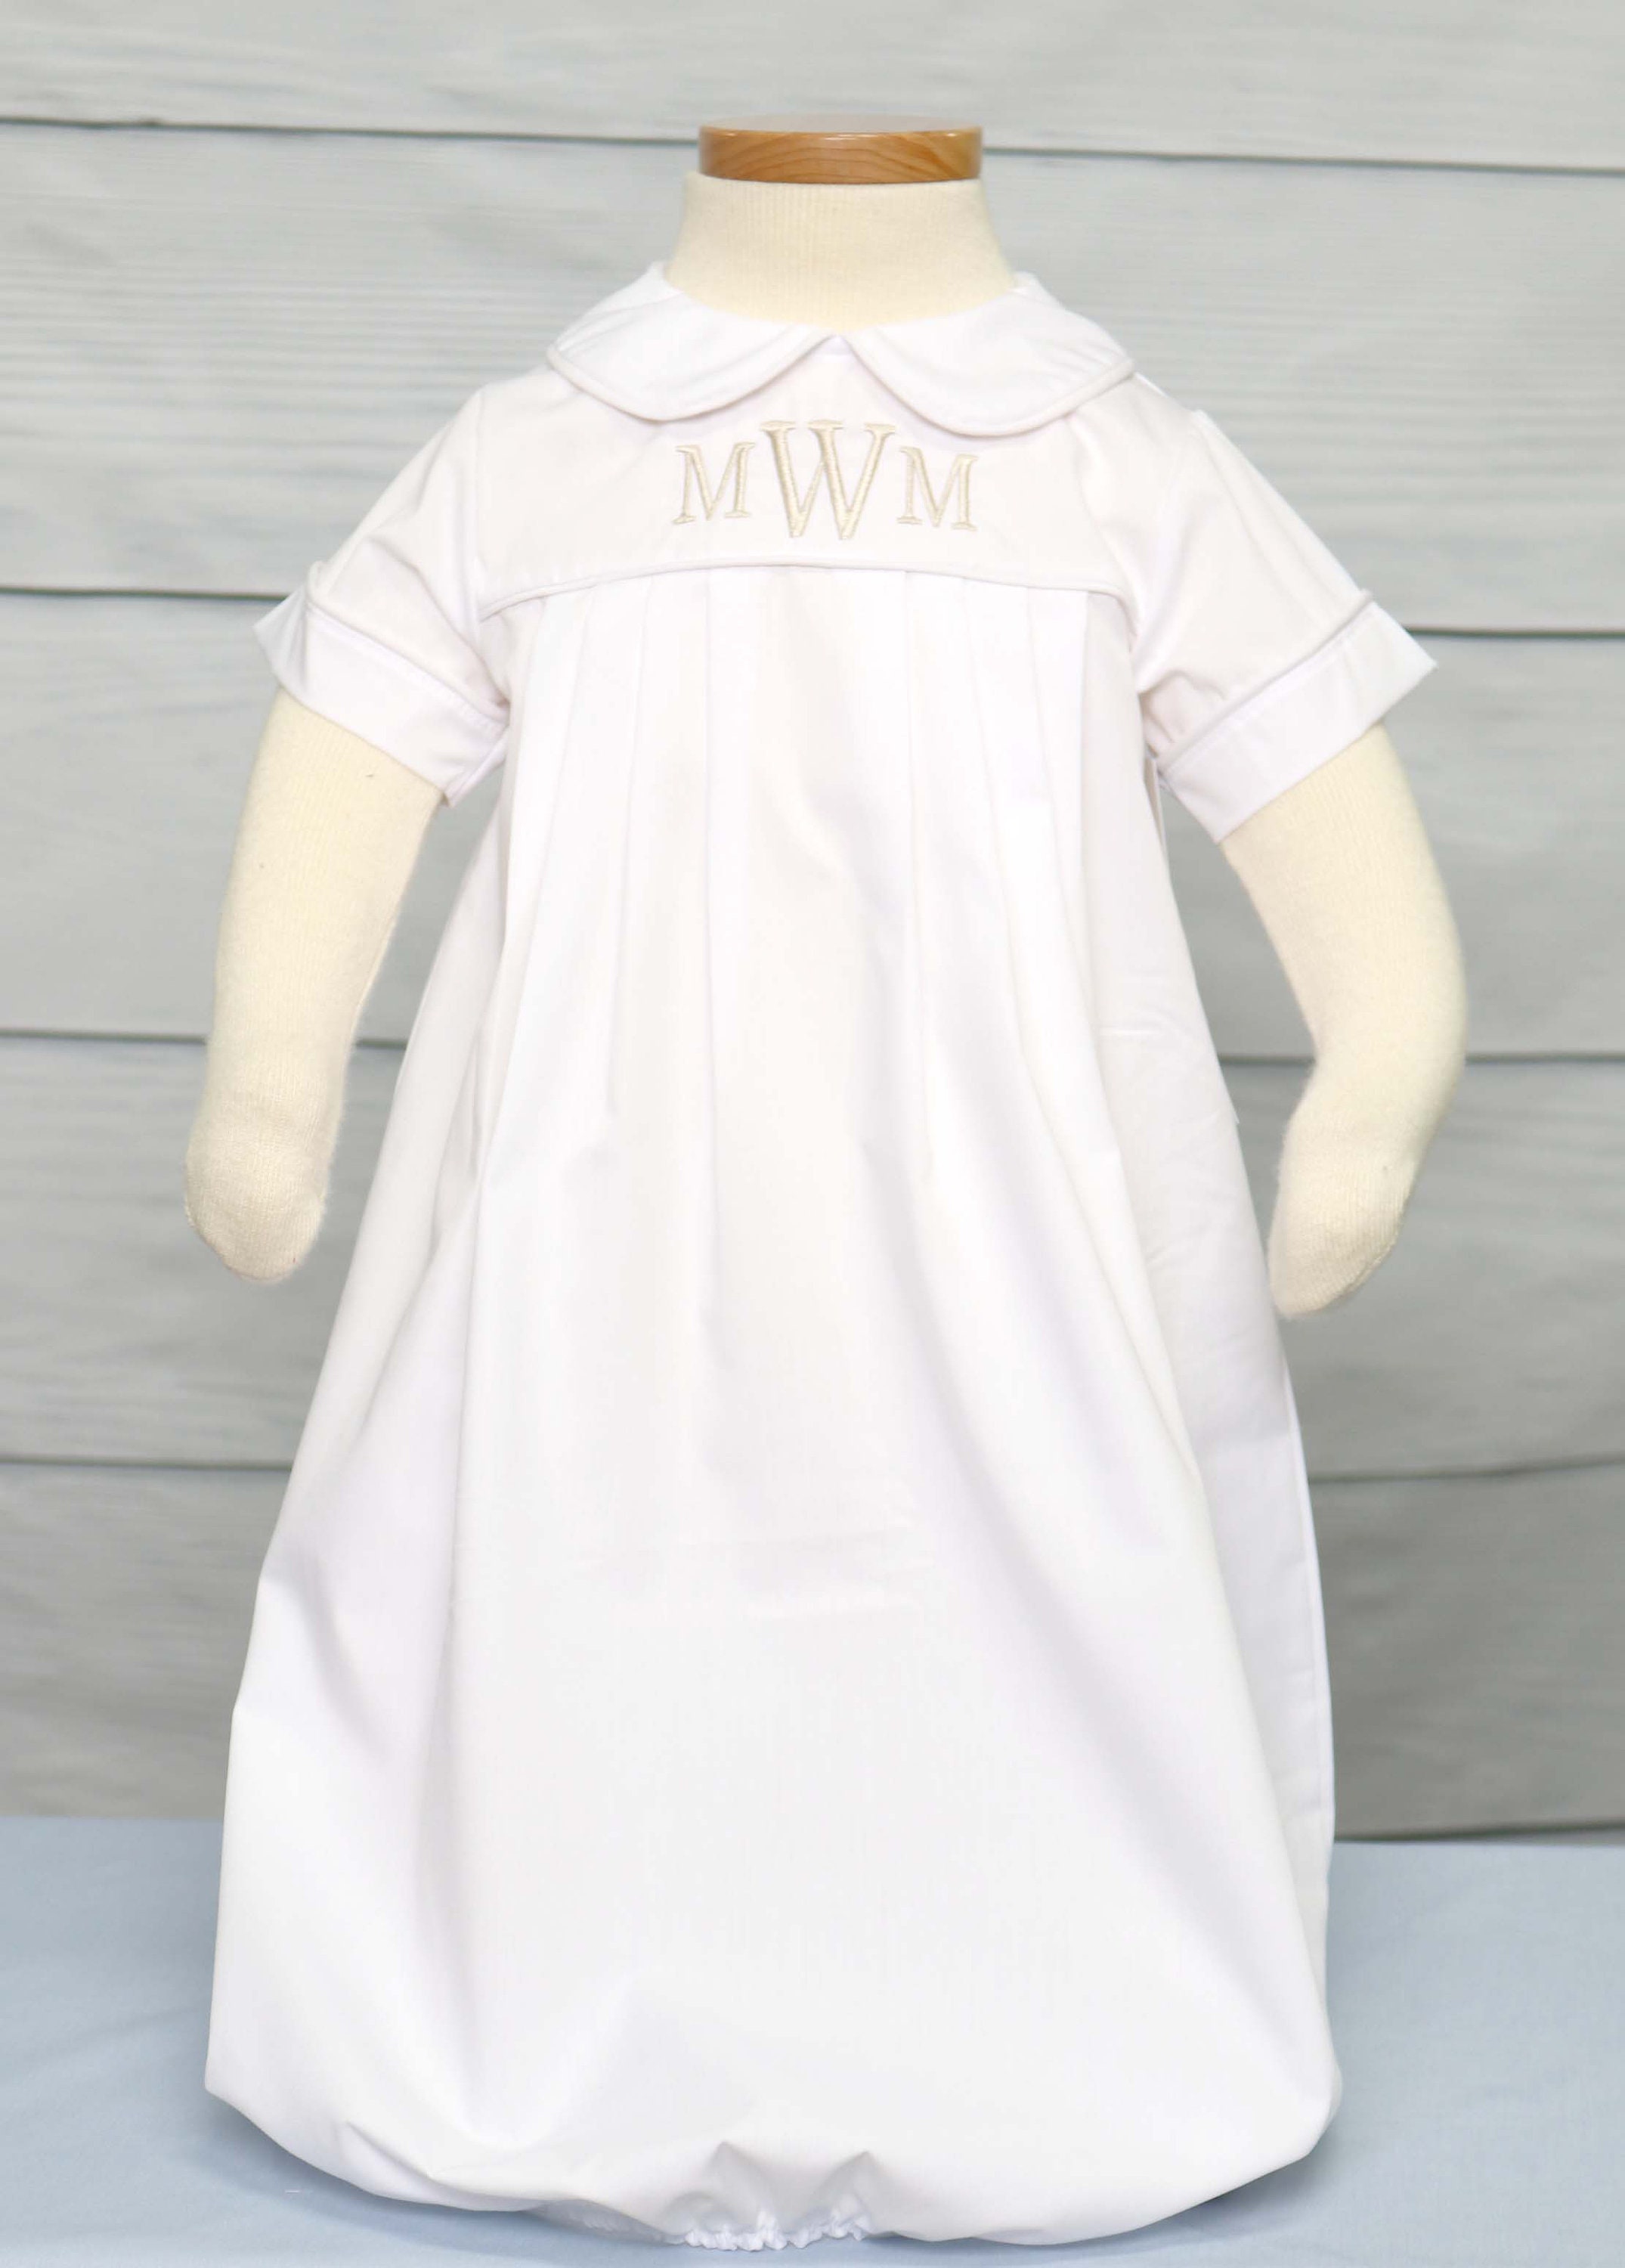 Christening Gown Boy Baptism Gown Boy Christening Gowns for | Etsy